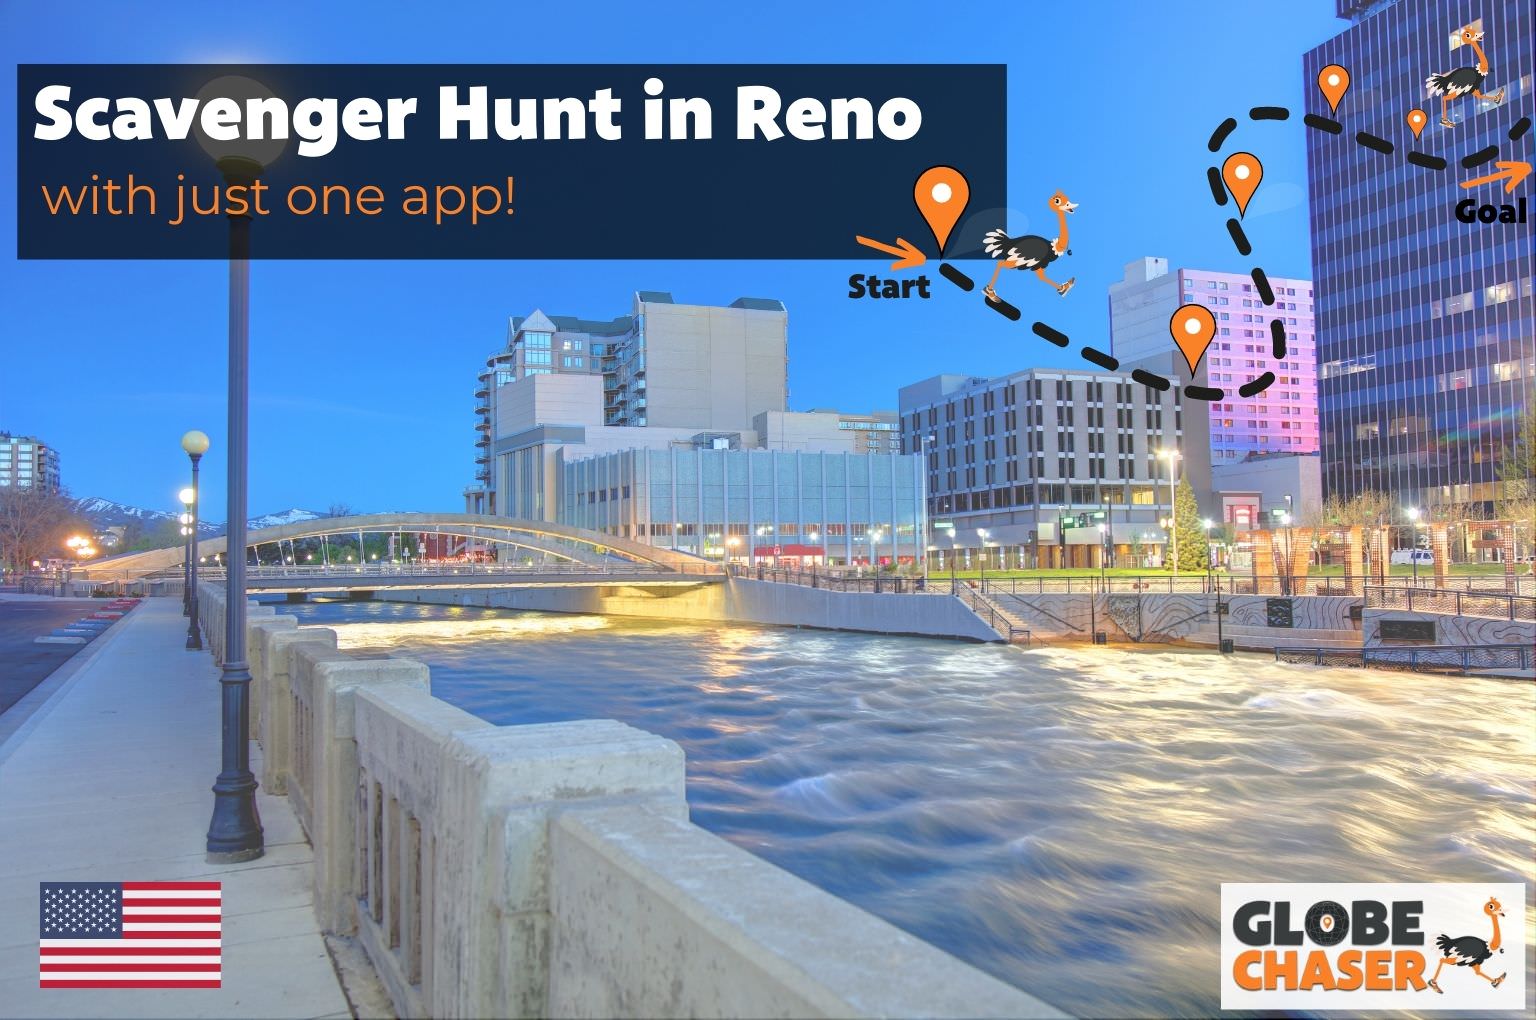 Scavenger Hunt in Reno, USA - Family Activities with the Globe Chaser App for Outdoor Fun